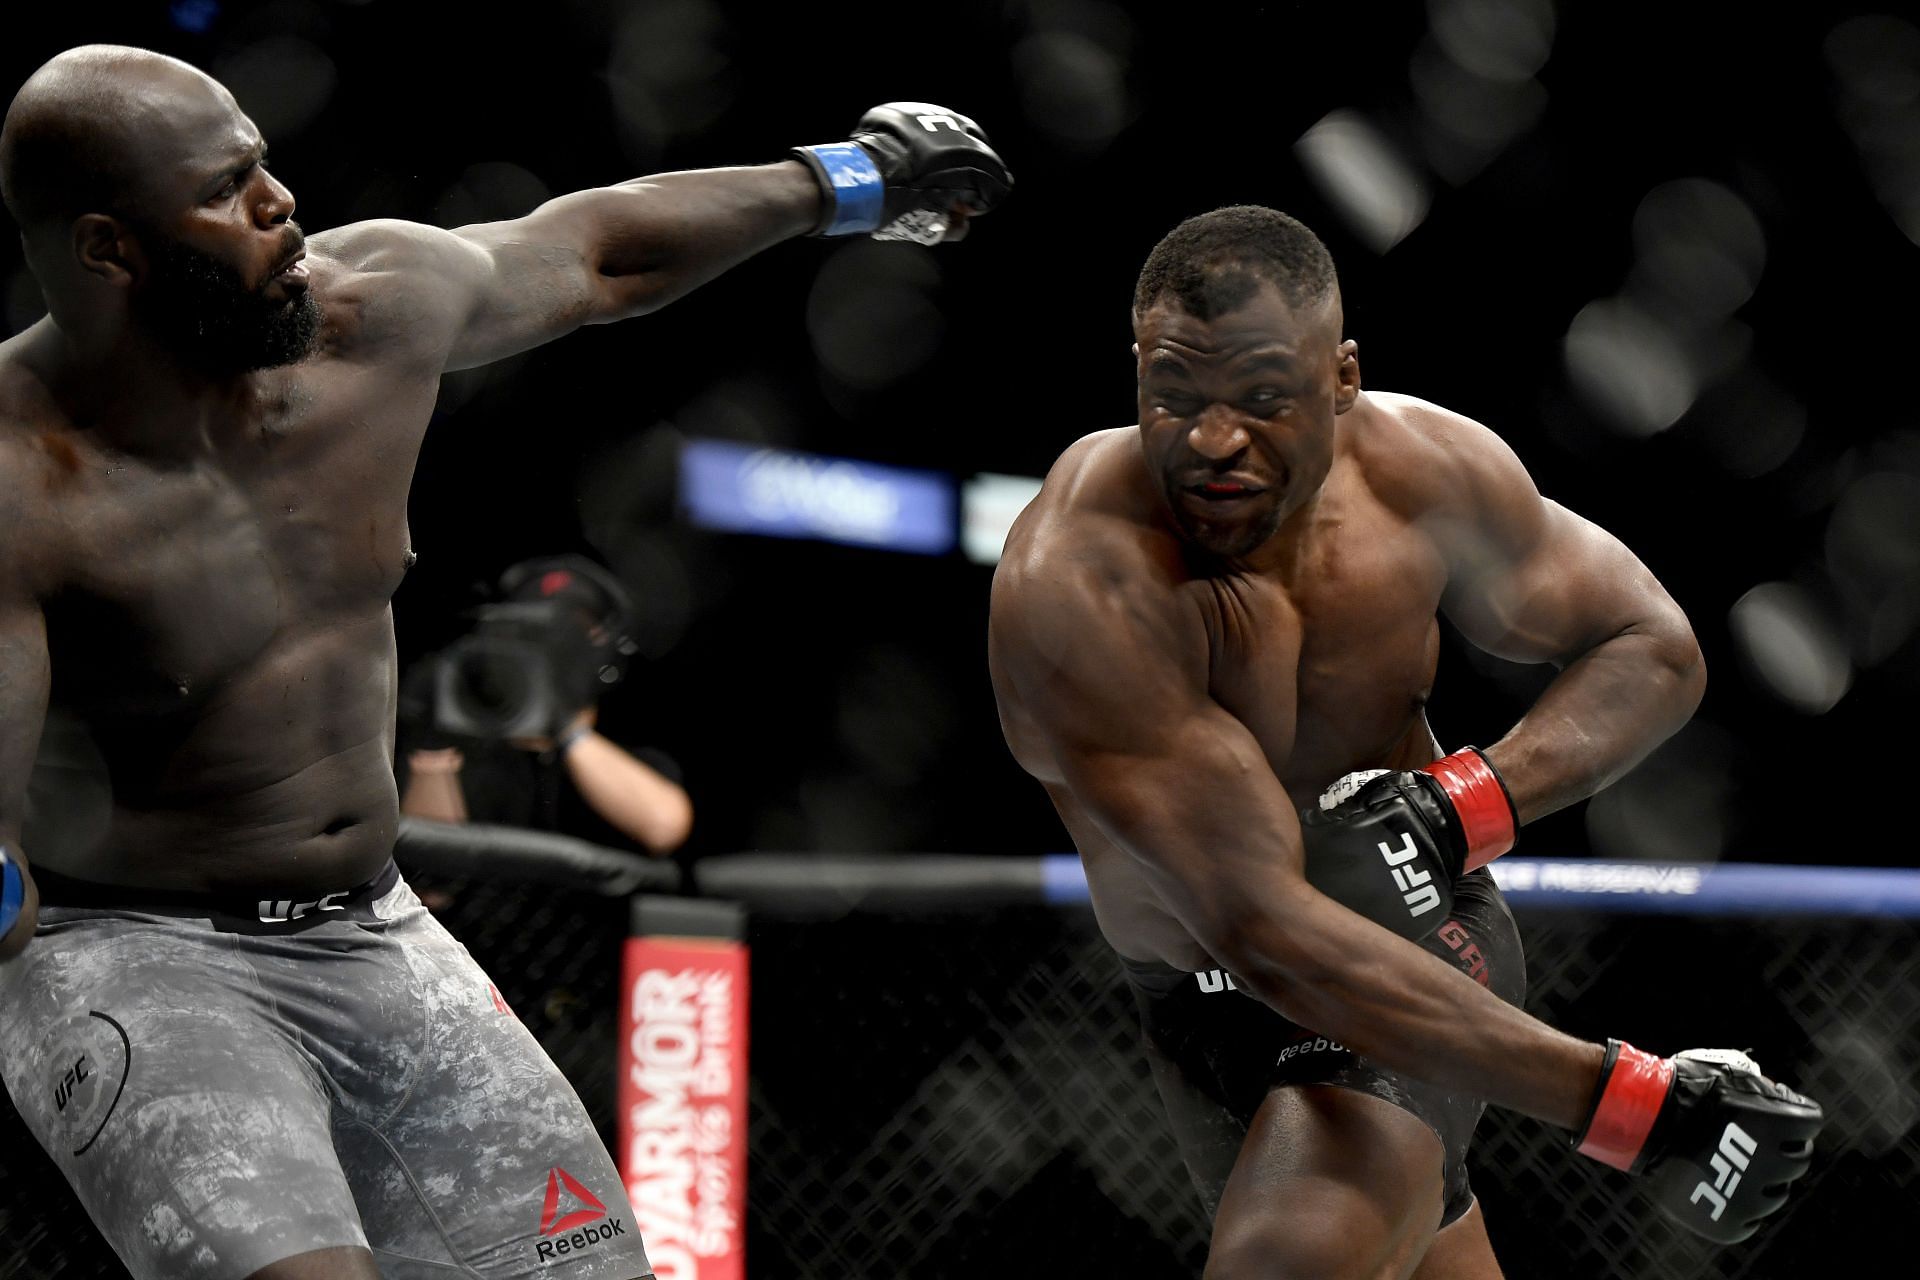 Francis Ngannou might struggle in boxing despite his punching power